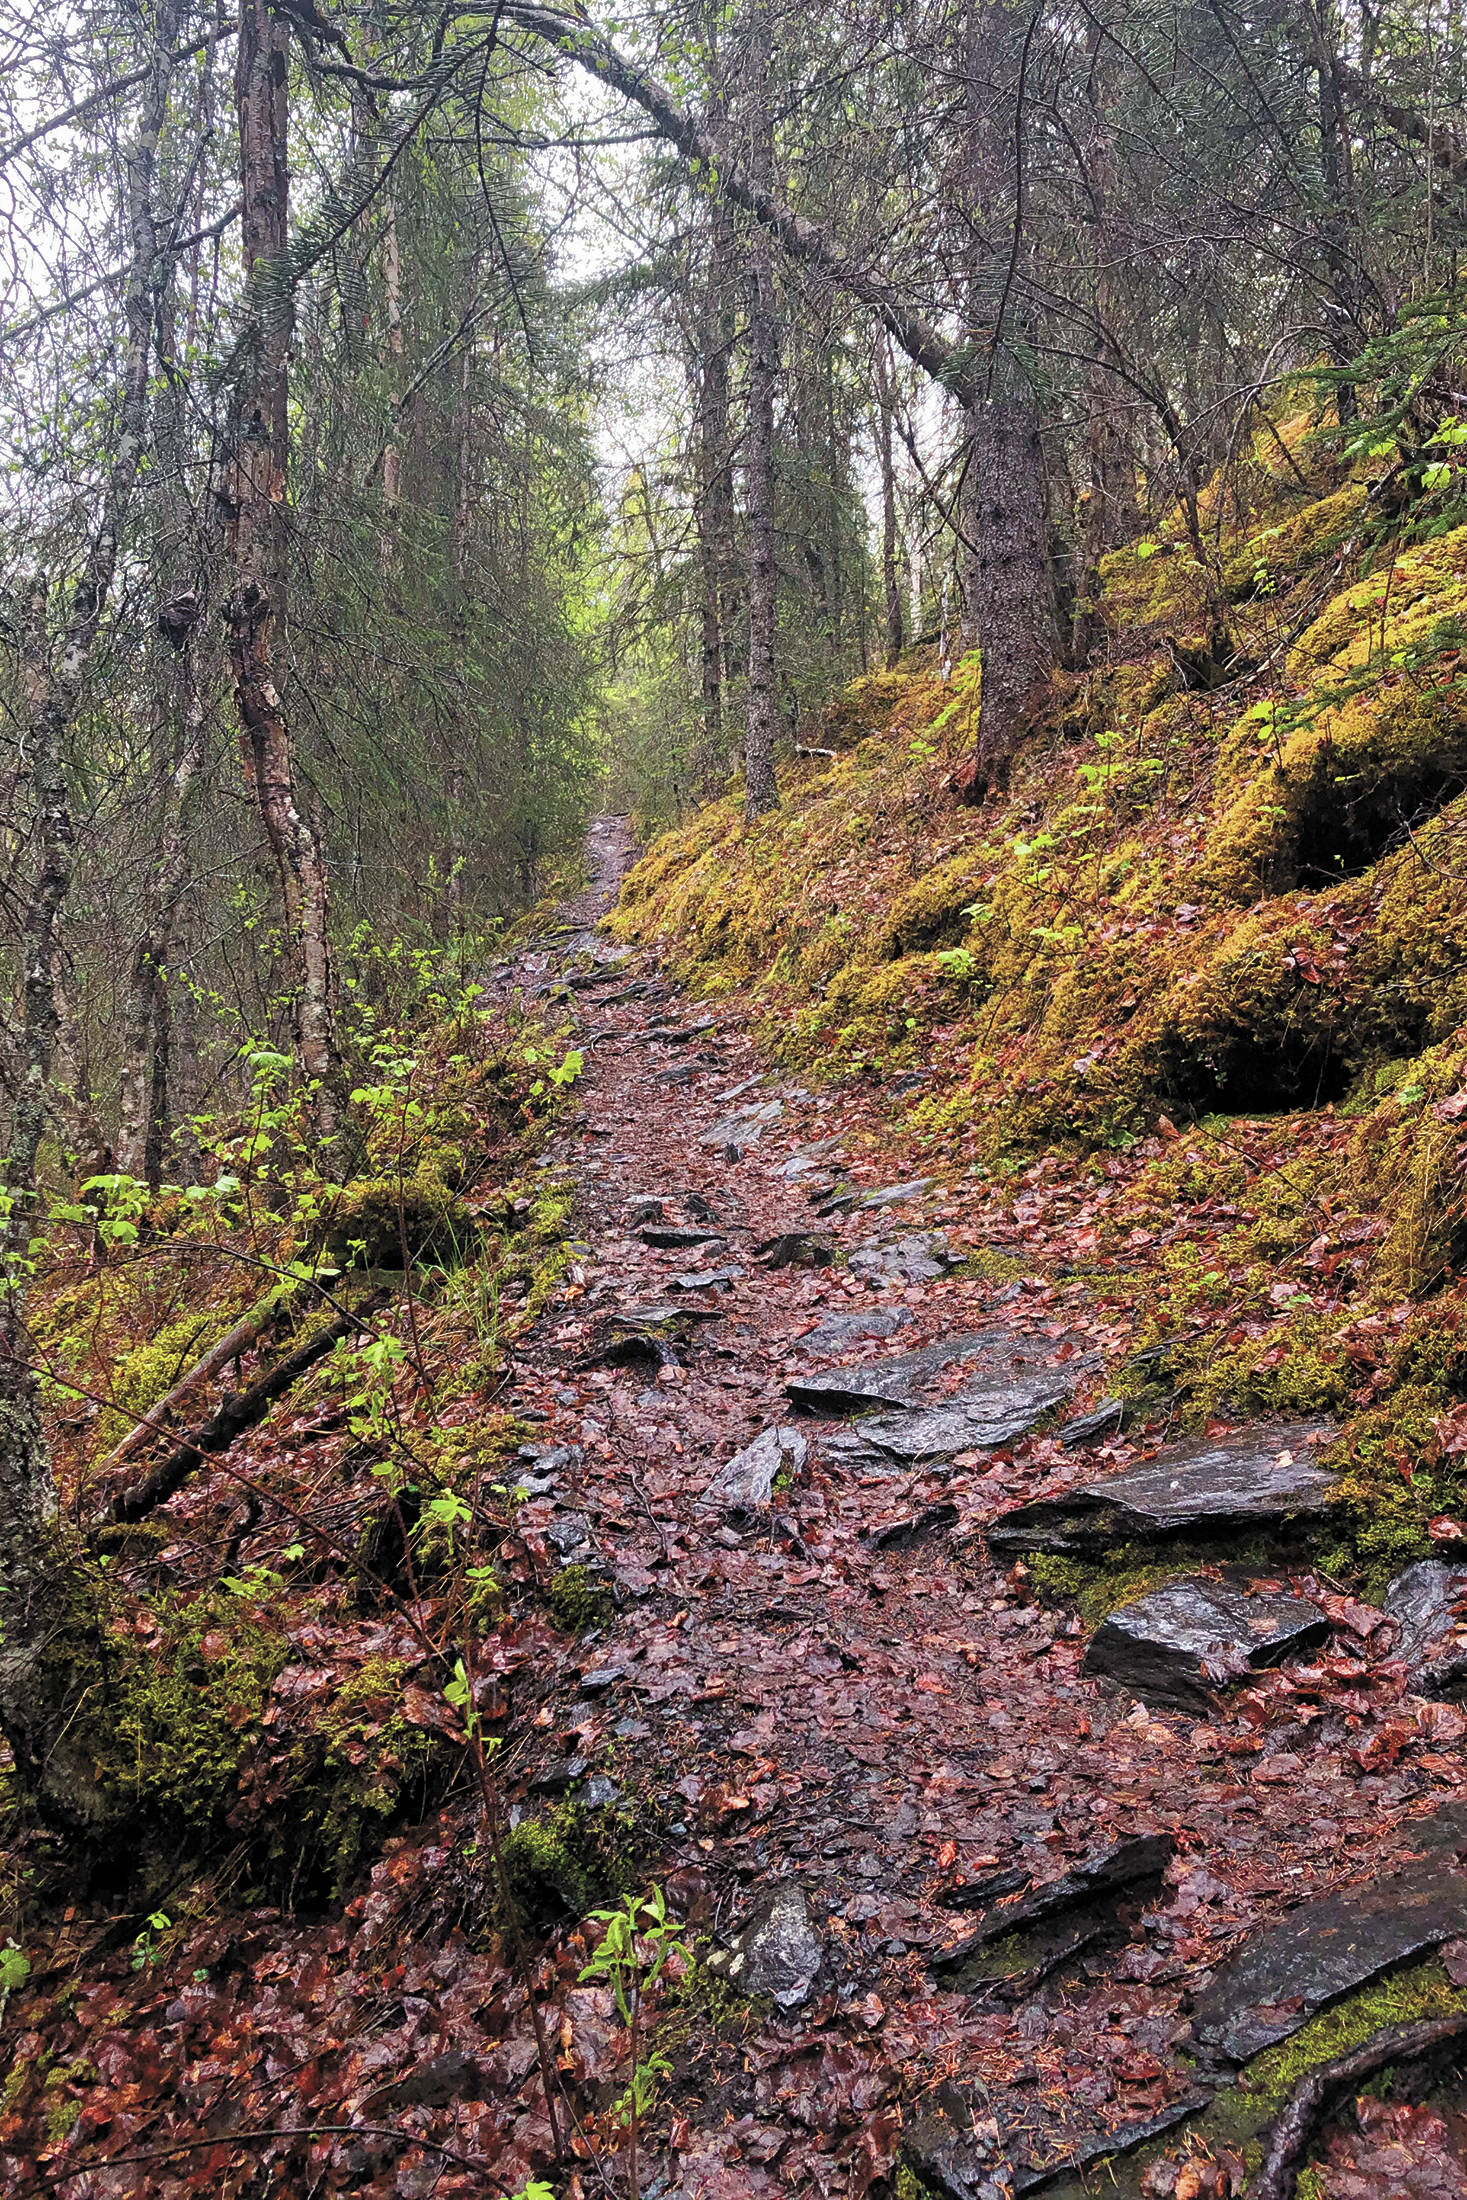 A wooded path dotted with slick, wet rocks leads back to the main route to the Russian River Falls on Sunday, May 24, 2020 in Cooper Landing, Alaska. (Photo by Megan Pacer/Homer News)